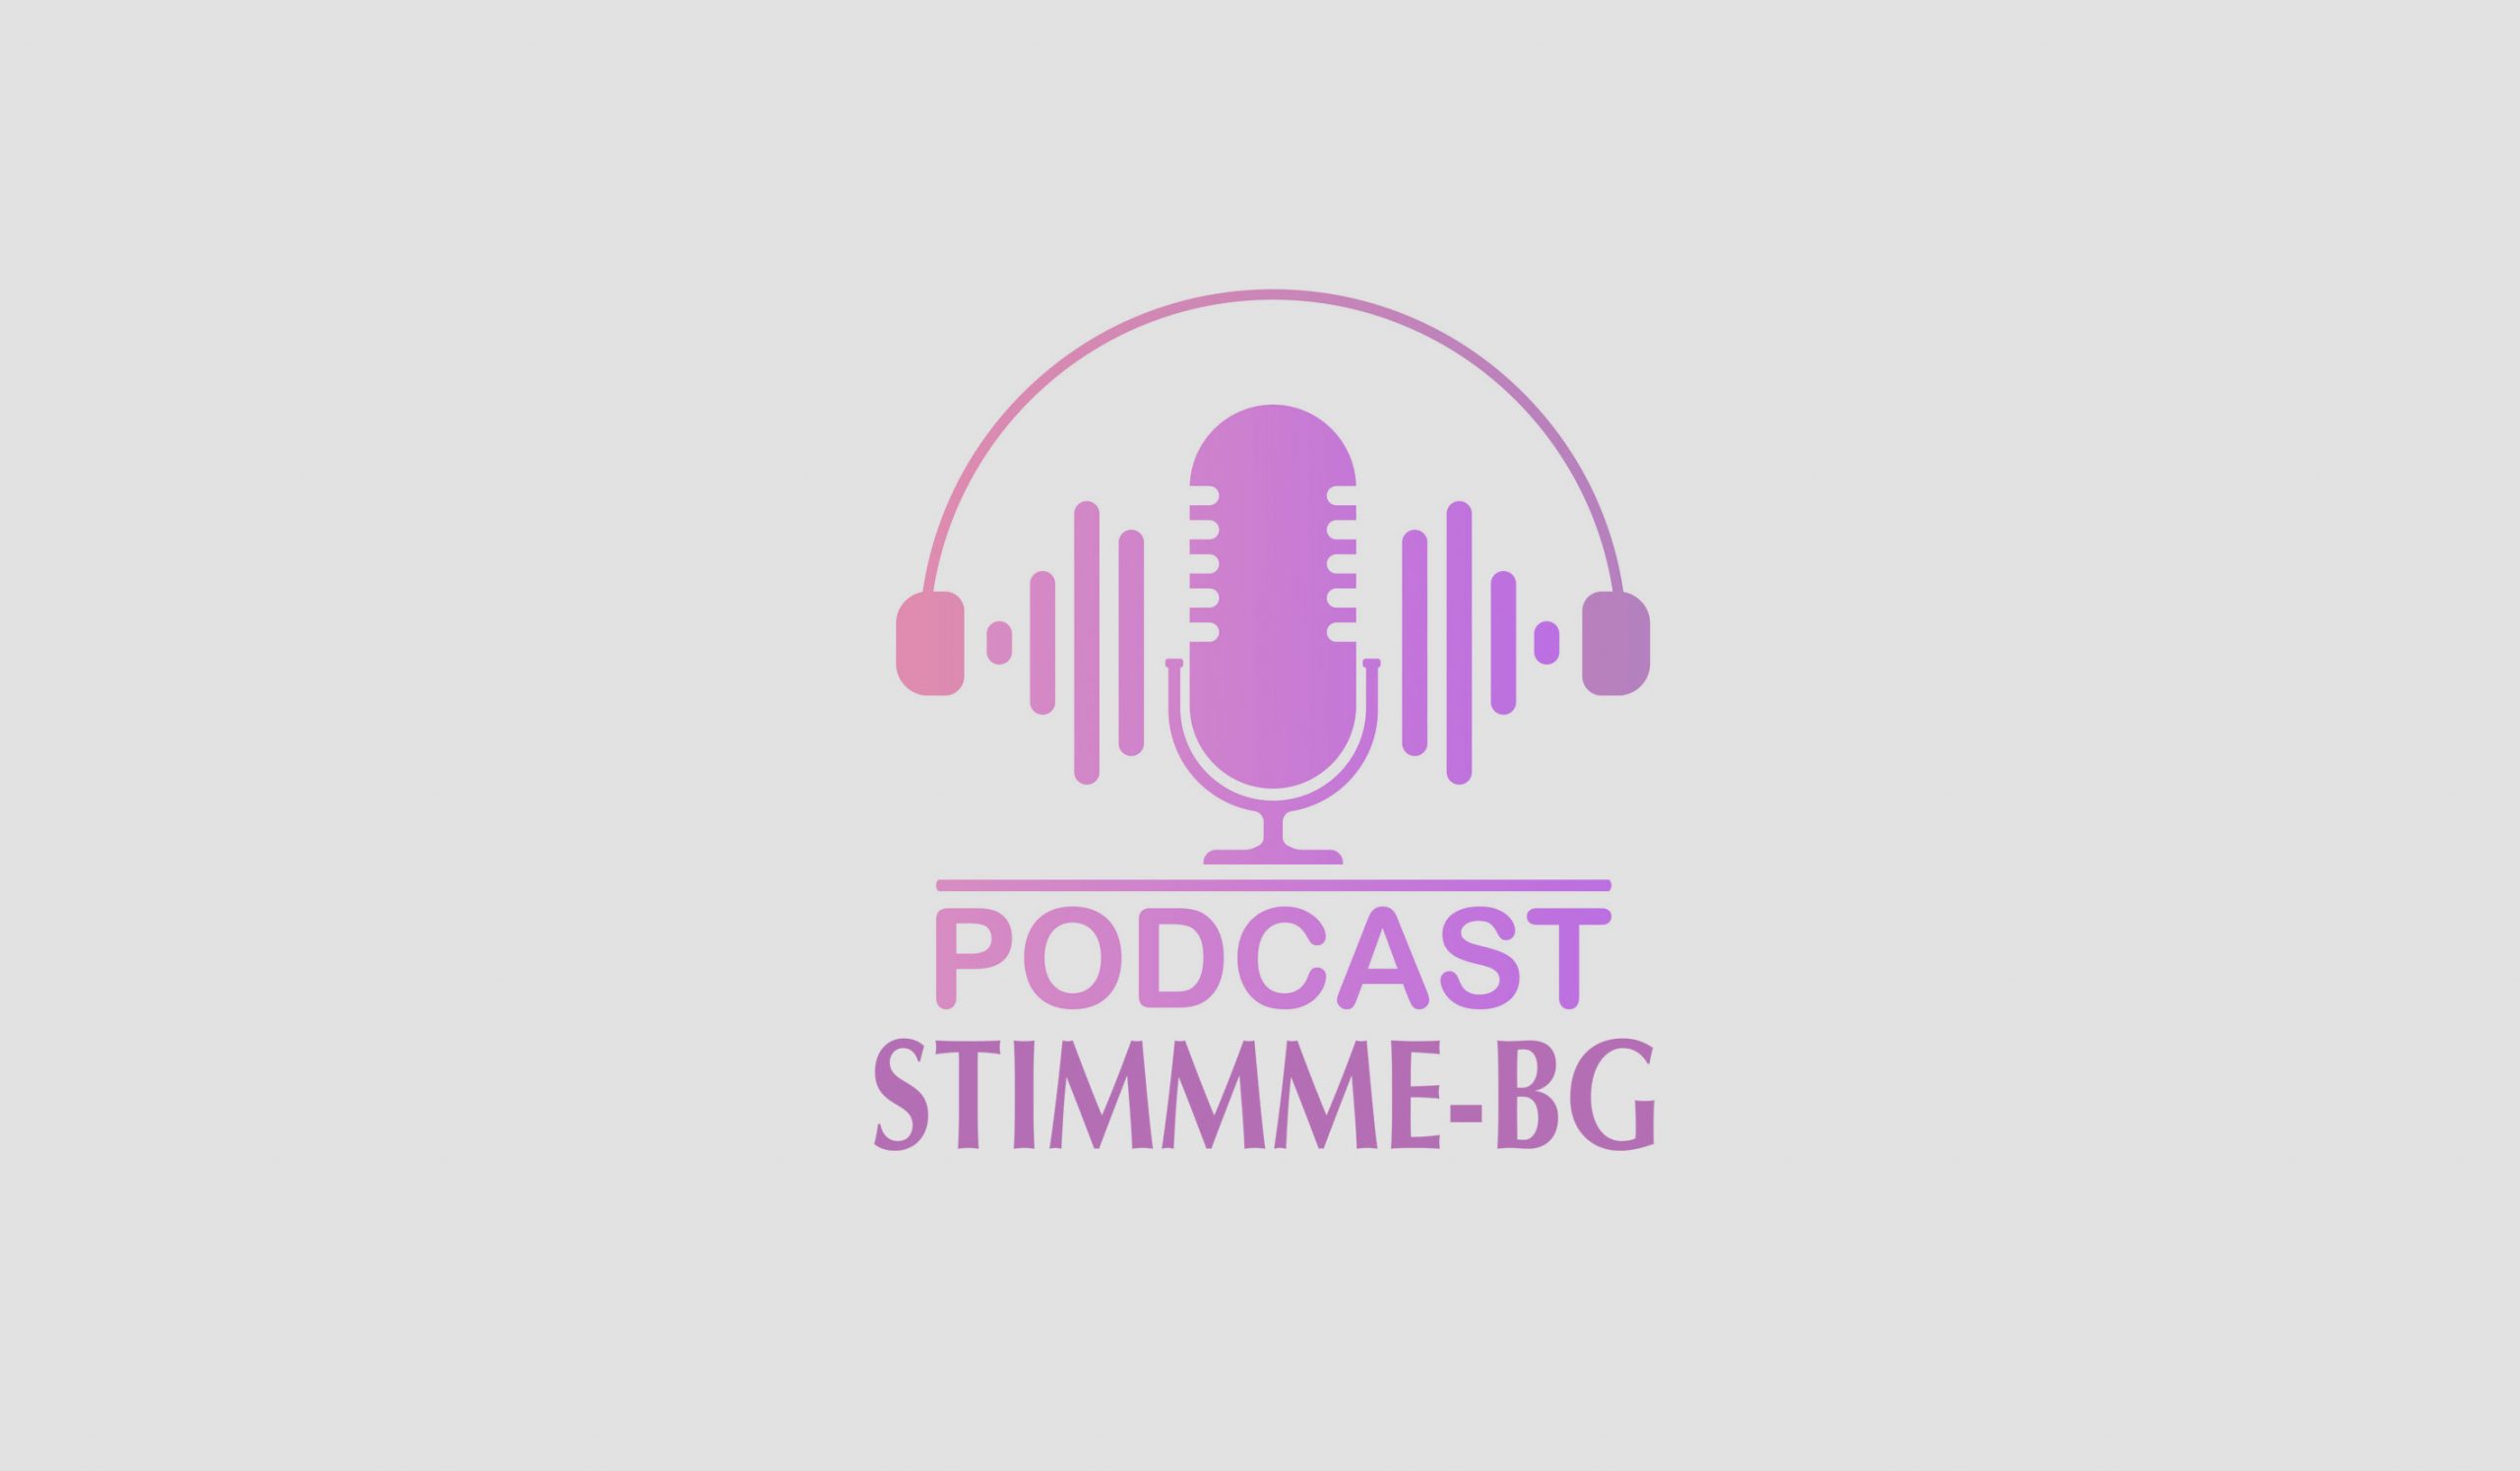 You are currently viewing STIMMME-BG entrevista nutricionista Raquel Milani